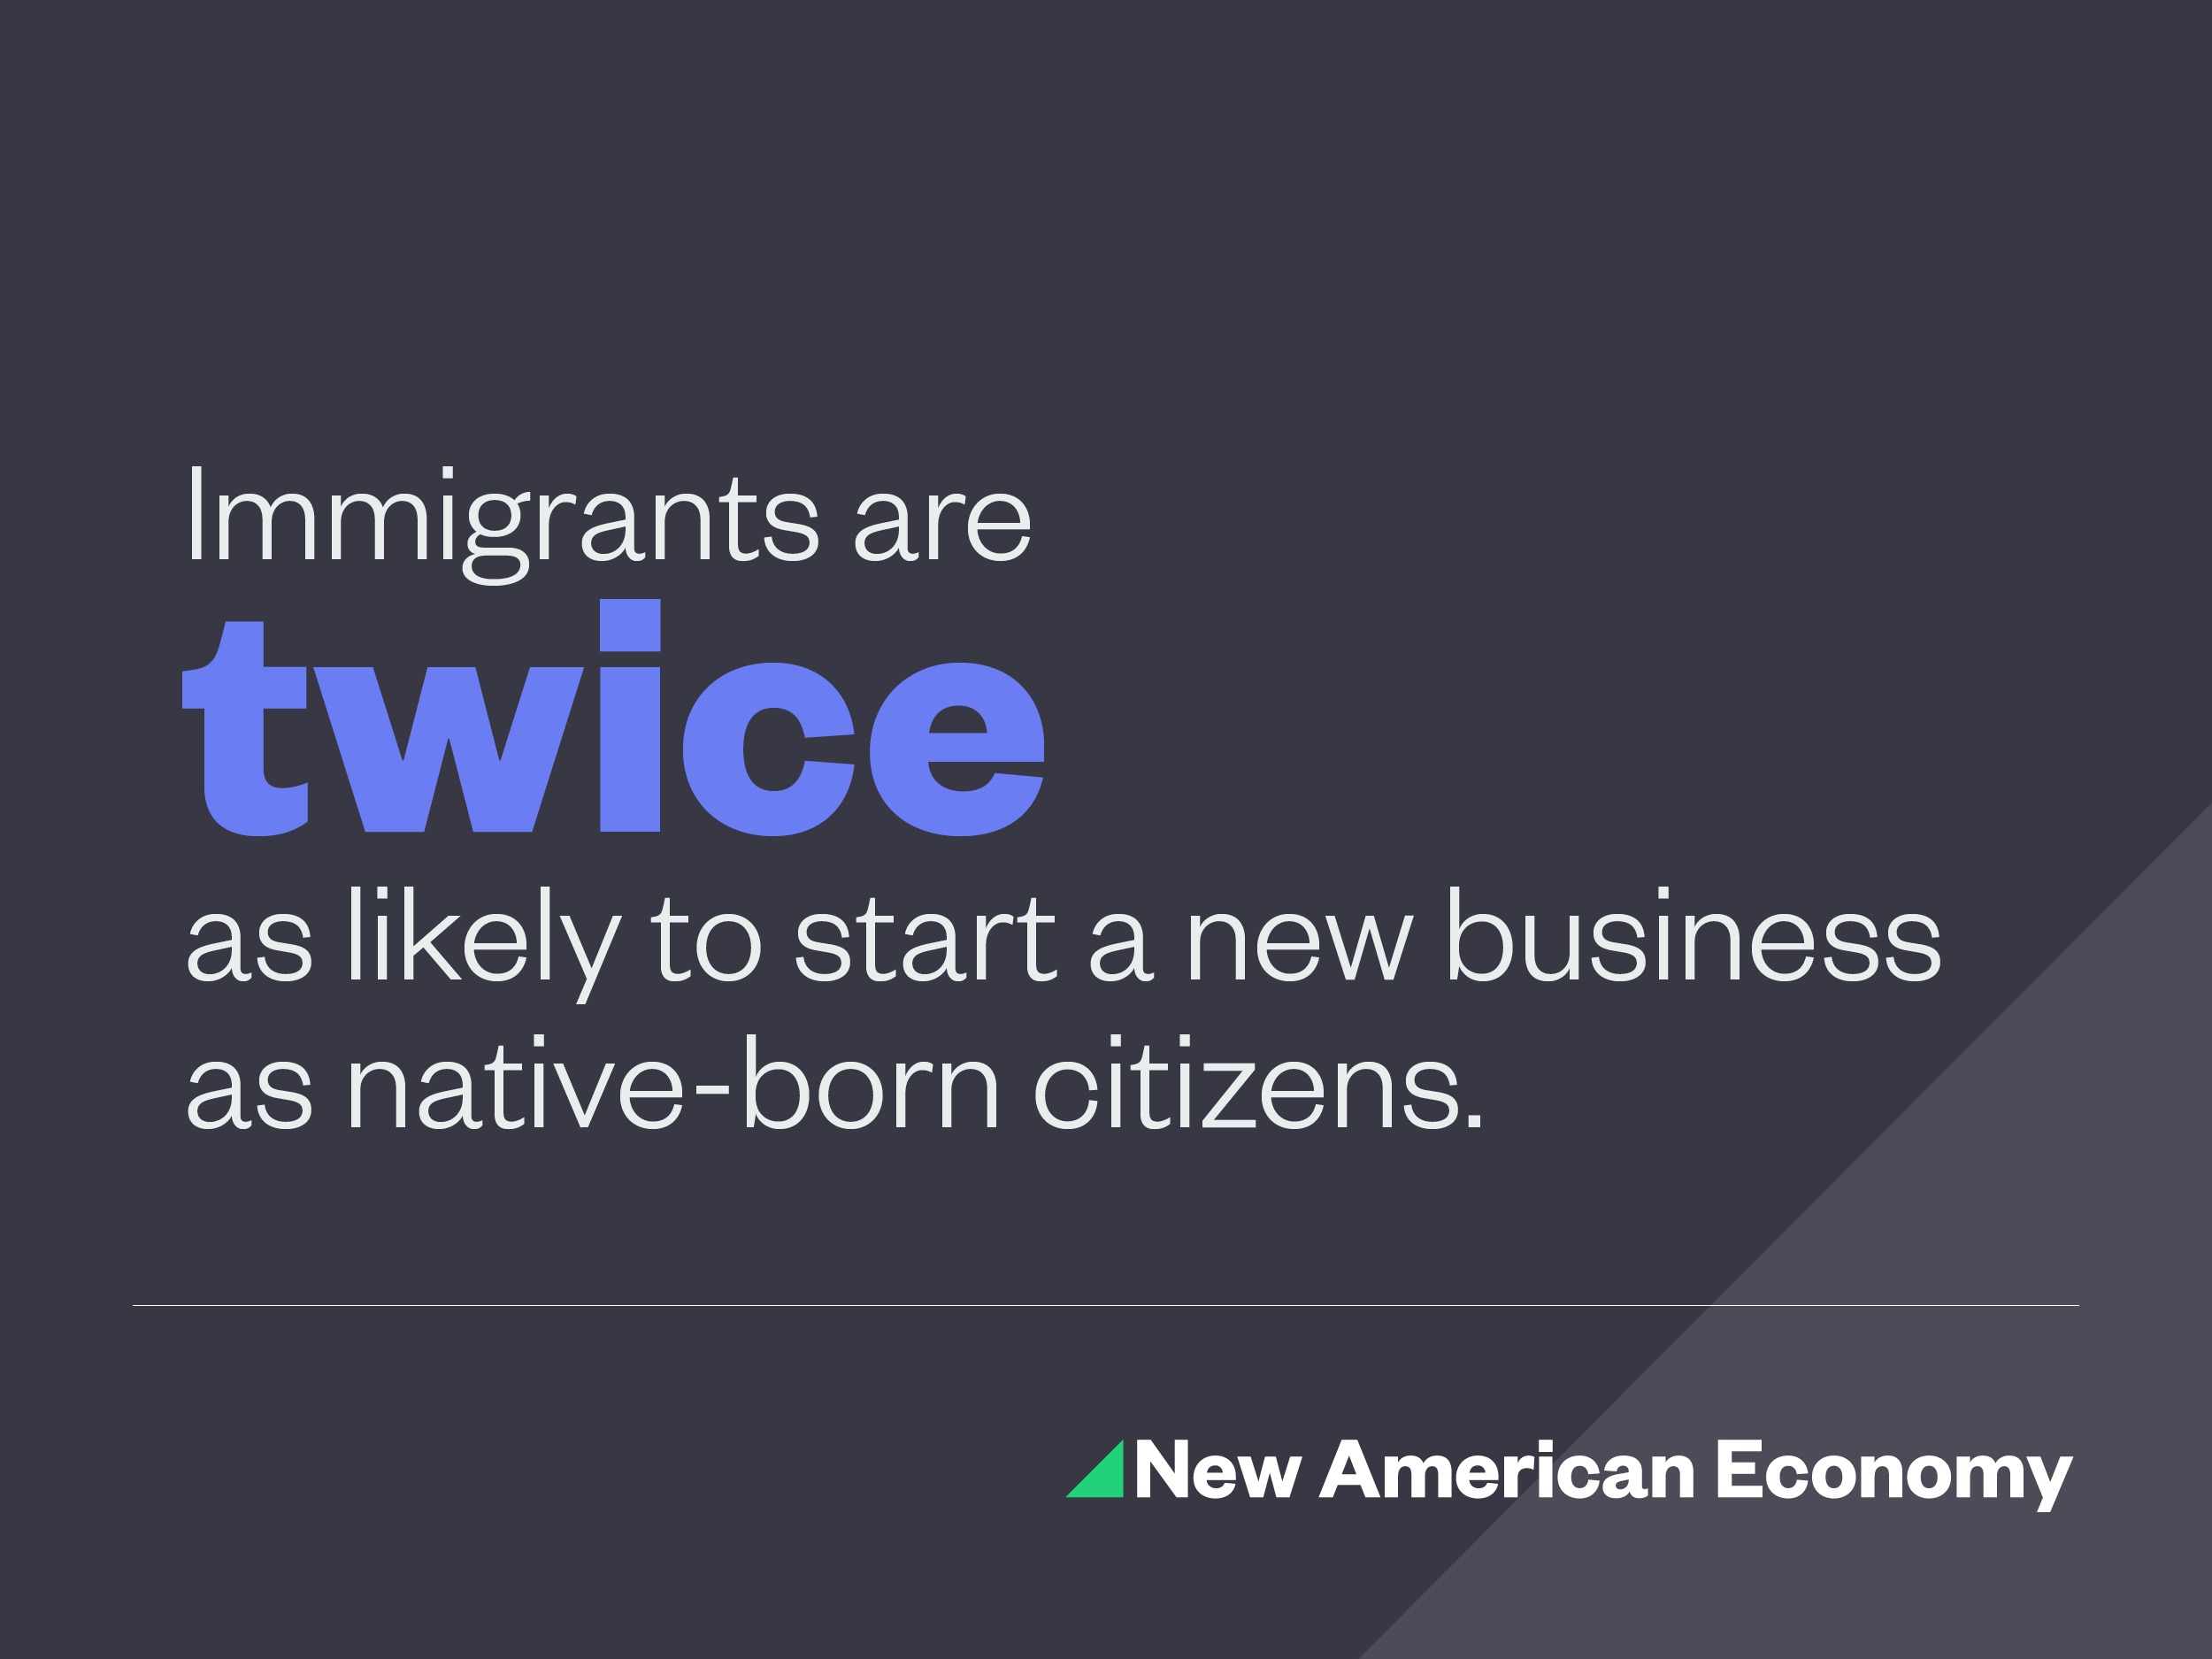 Immigrants are twice as likely to start a new business as native-born citizens.